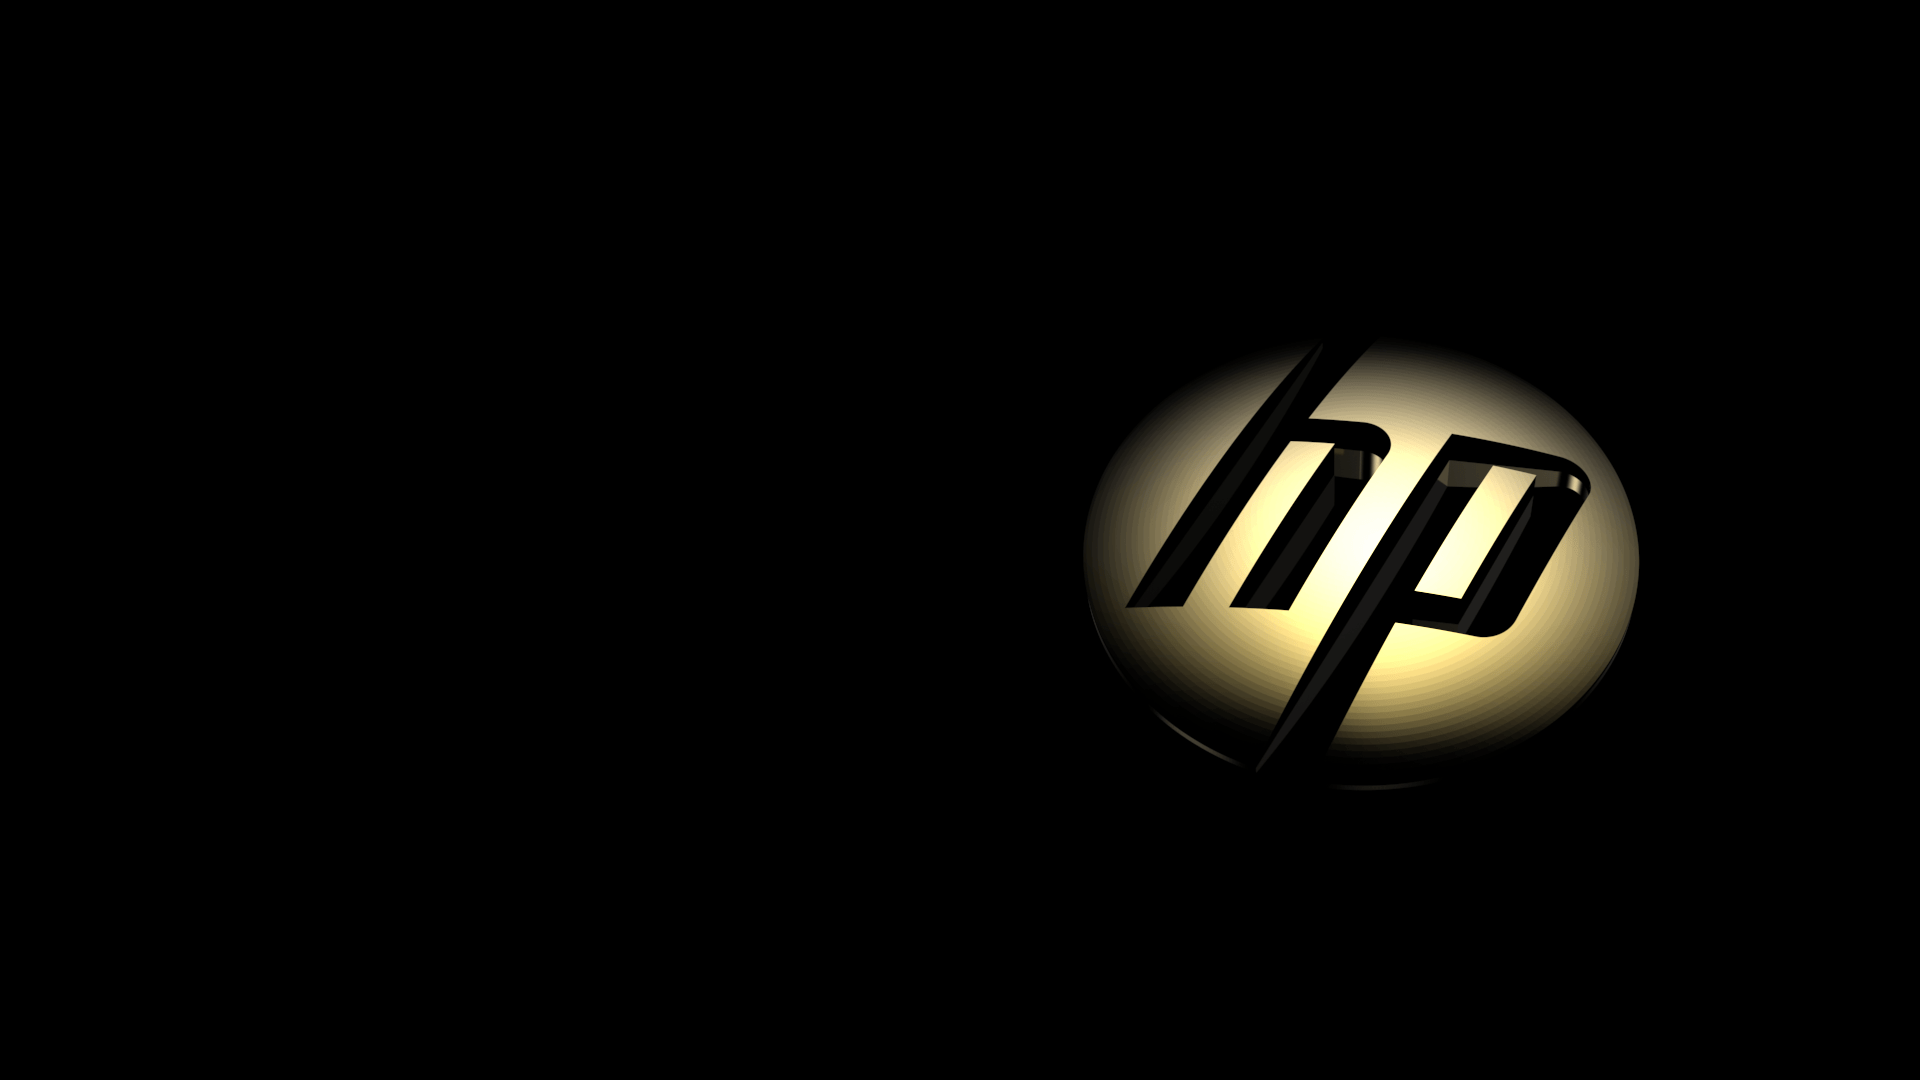 hp wallpapers for windows 10, wallpapers for hp laptops